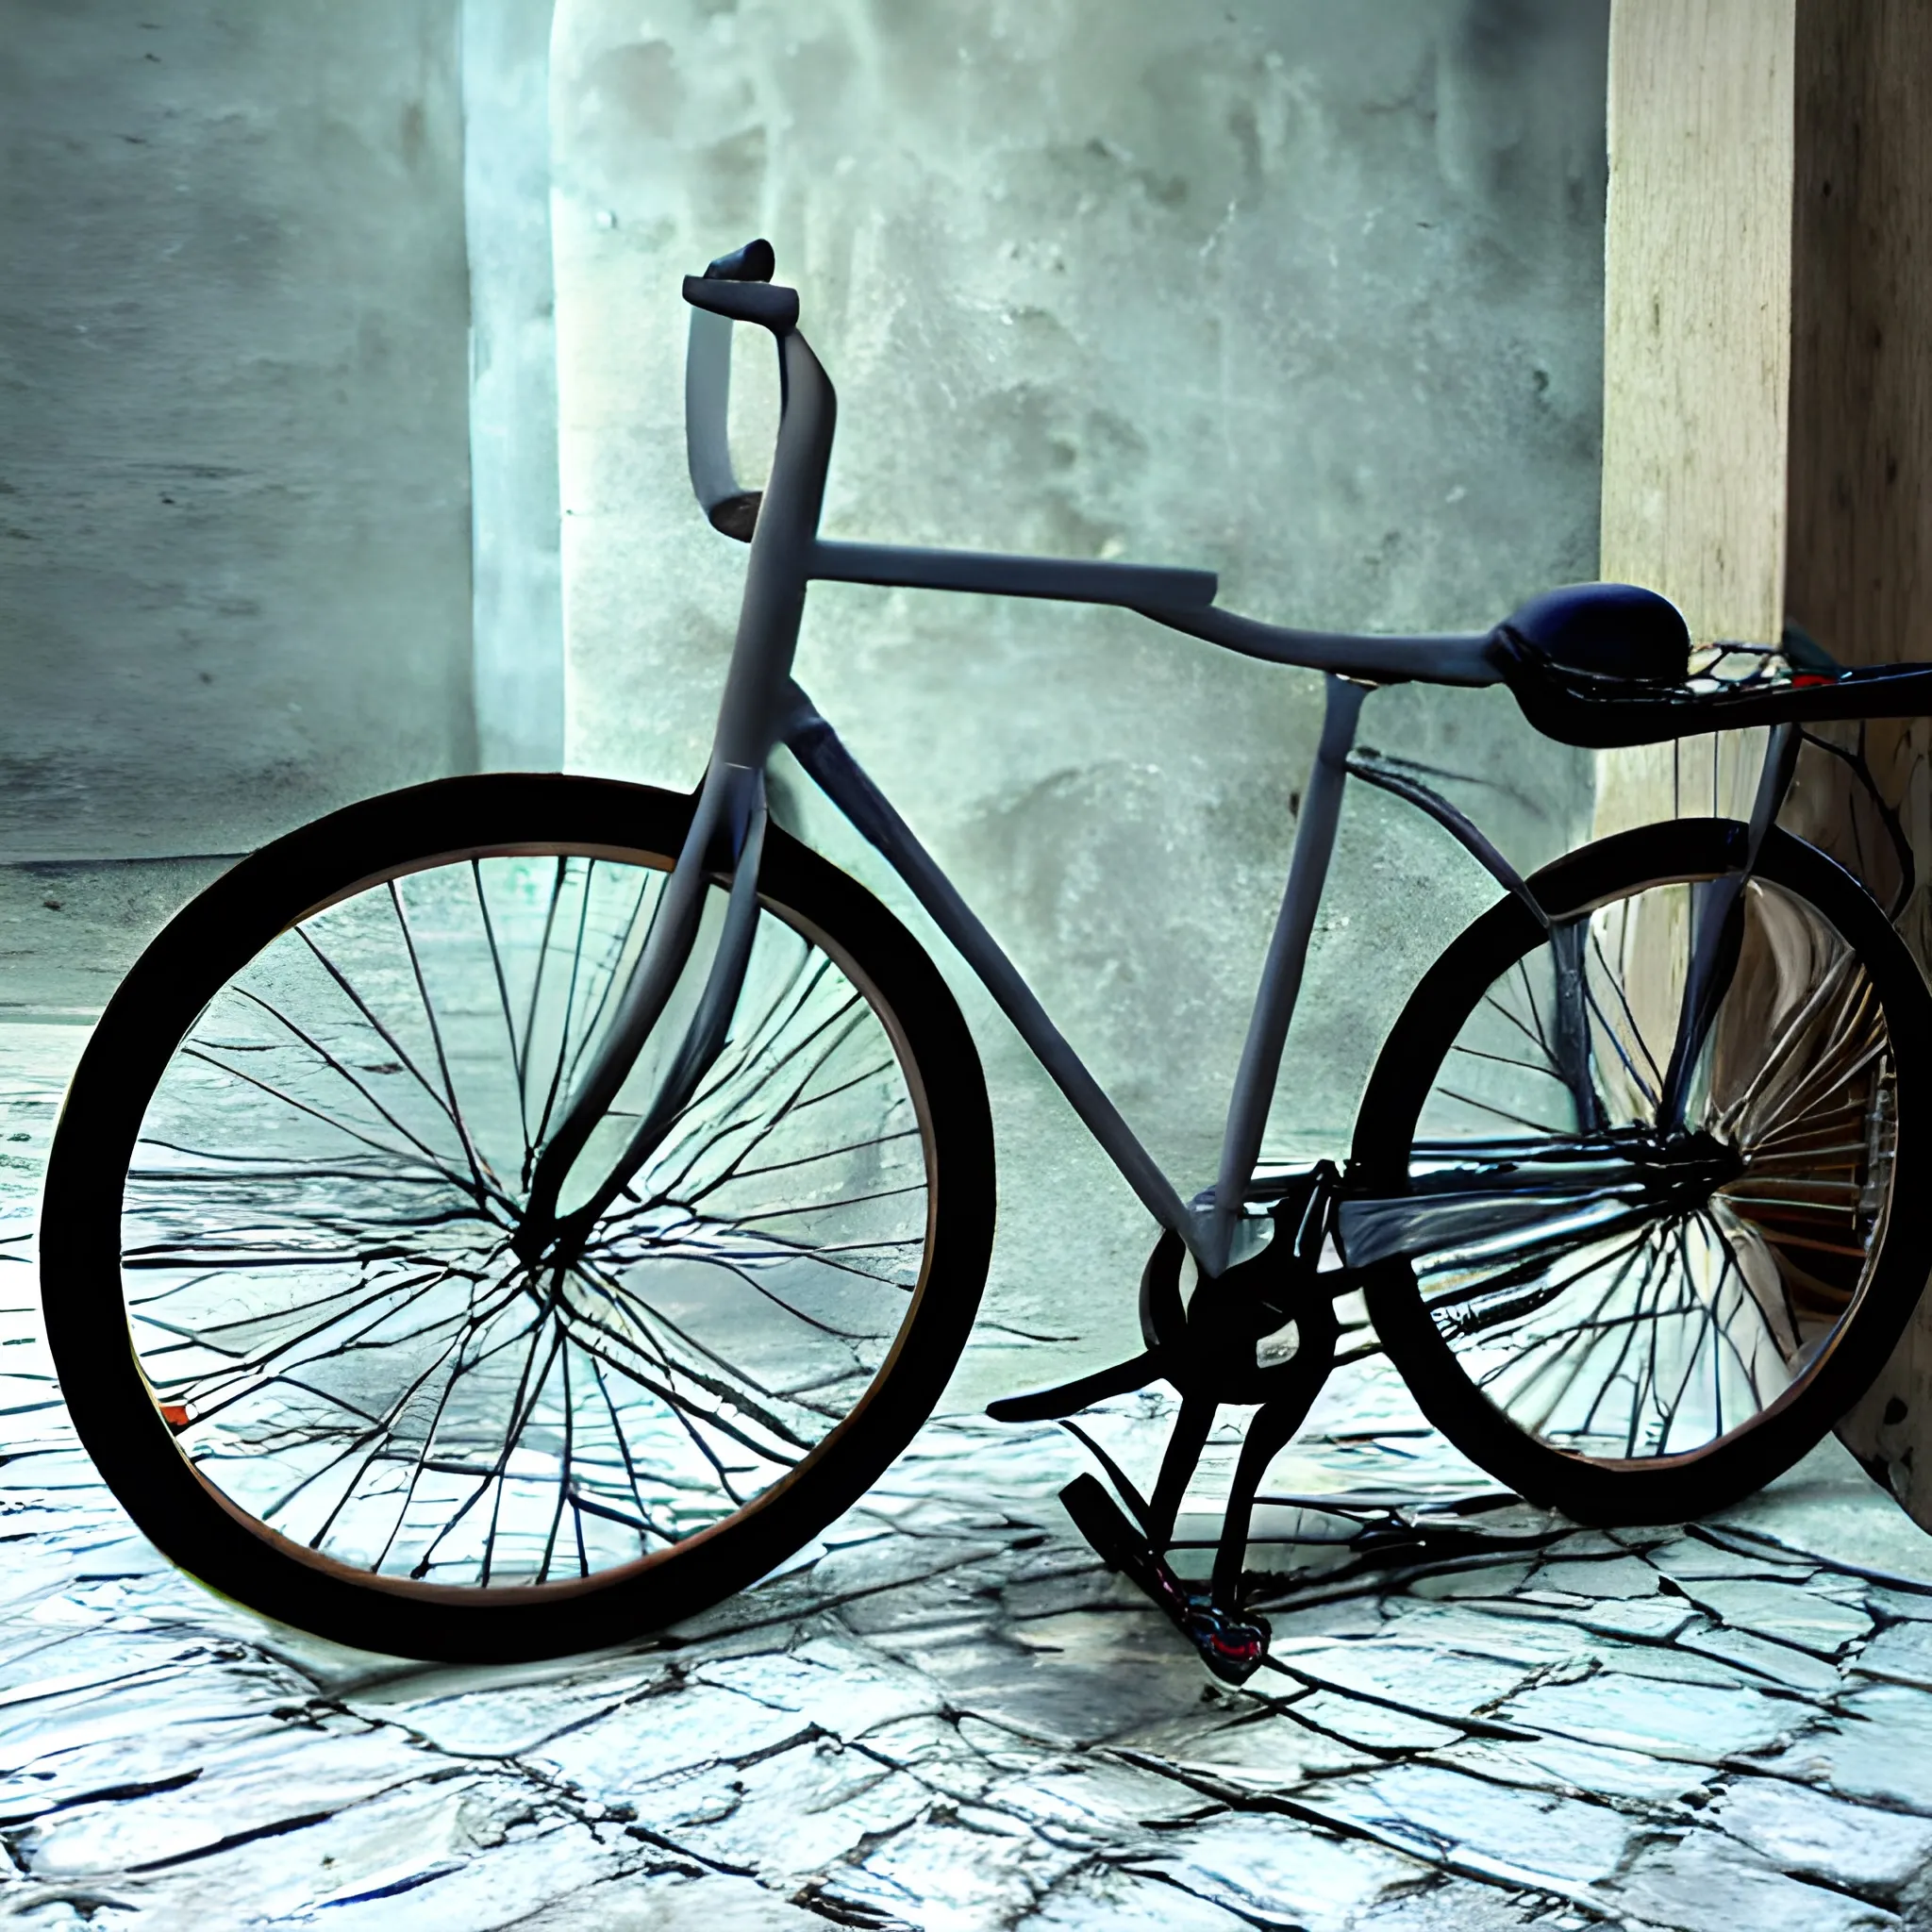 Stable Diffusion-generated image of a bicycle for the mind